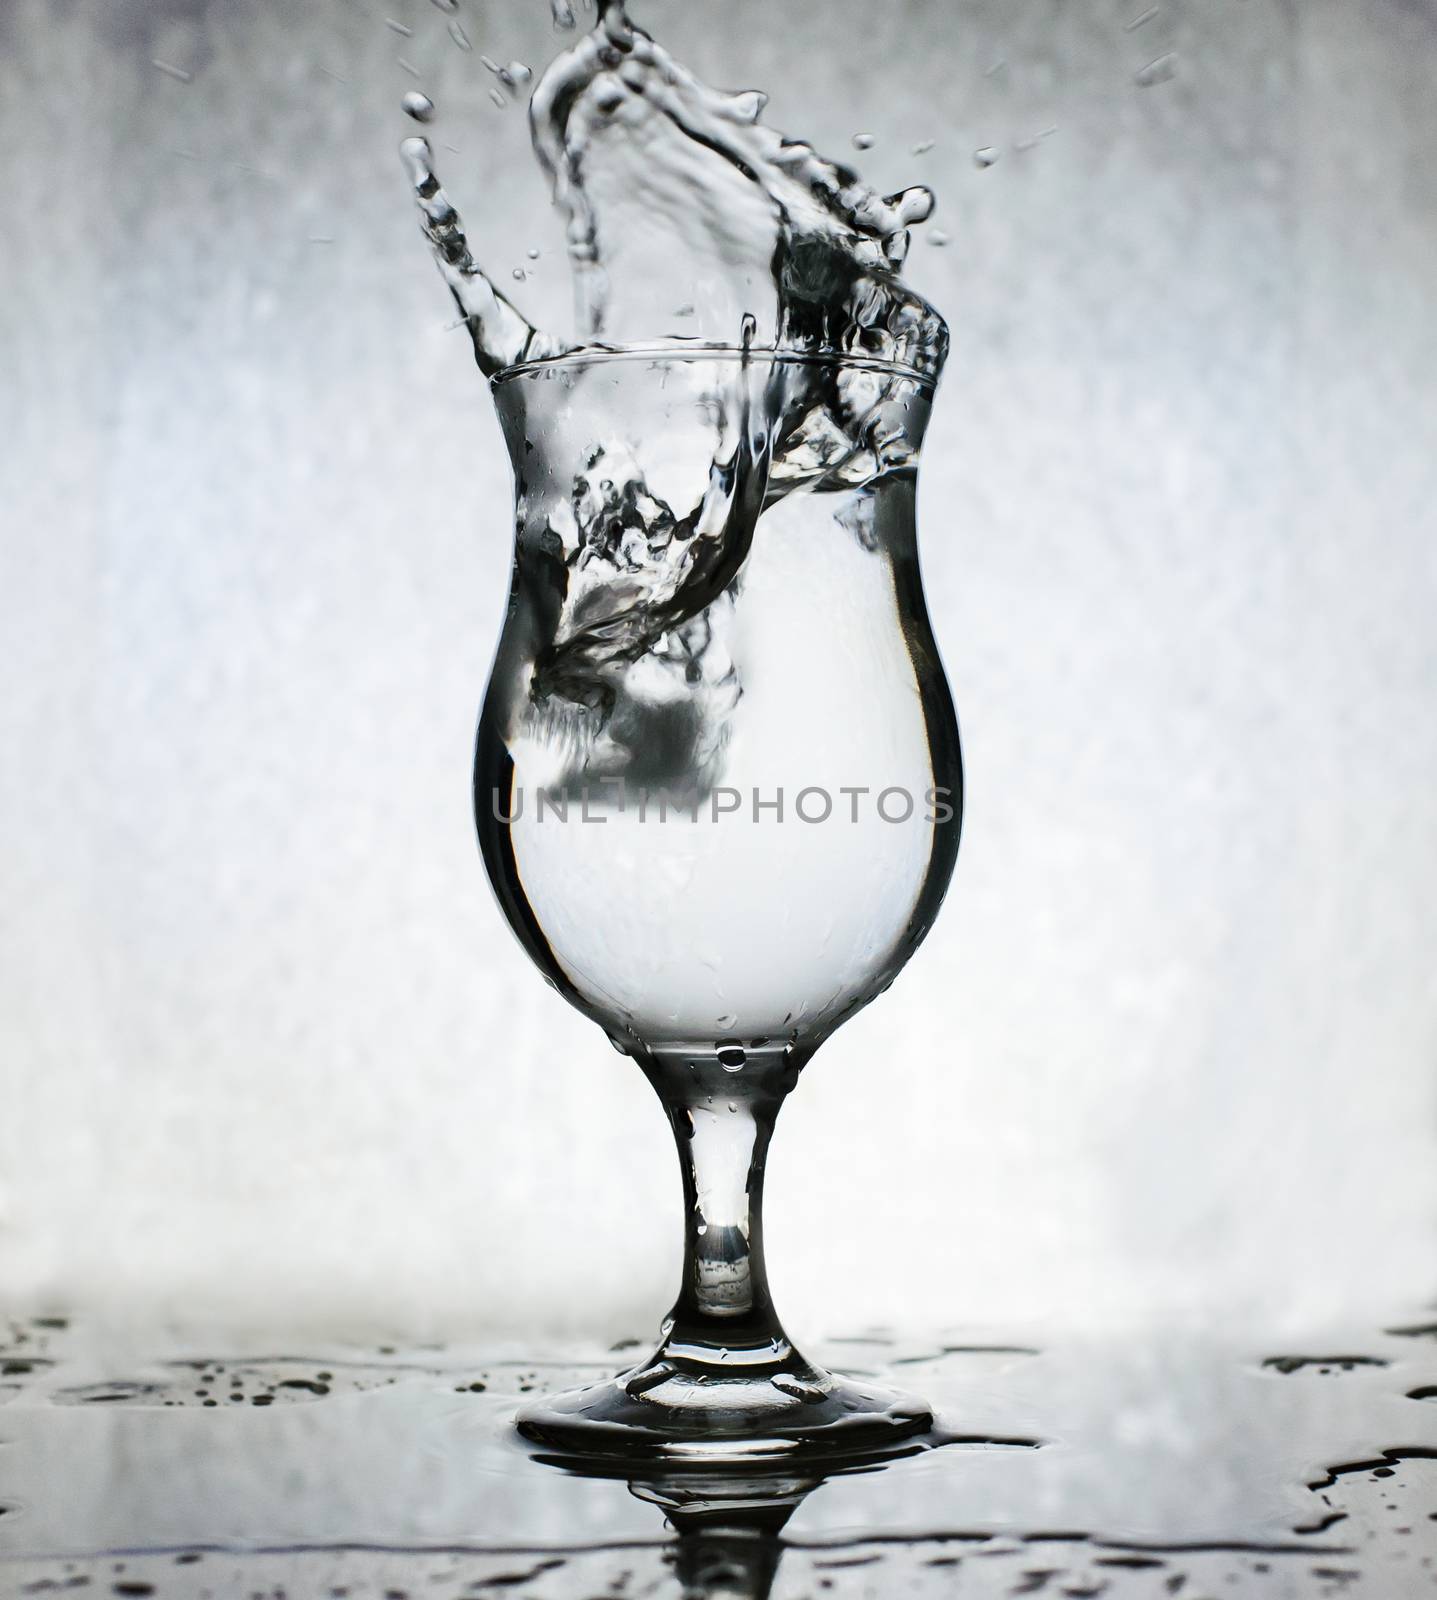 Ice cubes splashing into glass of water, motion blur